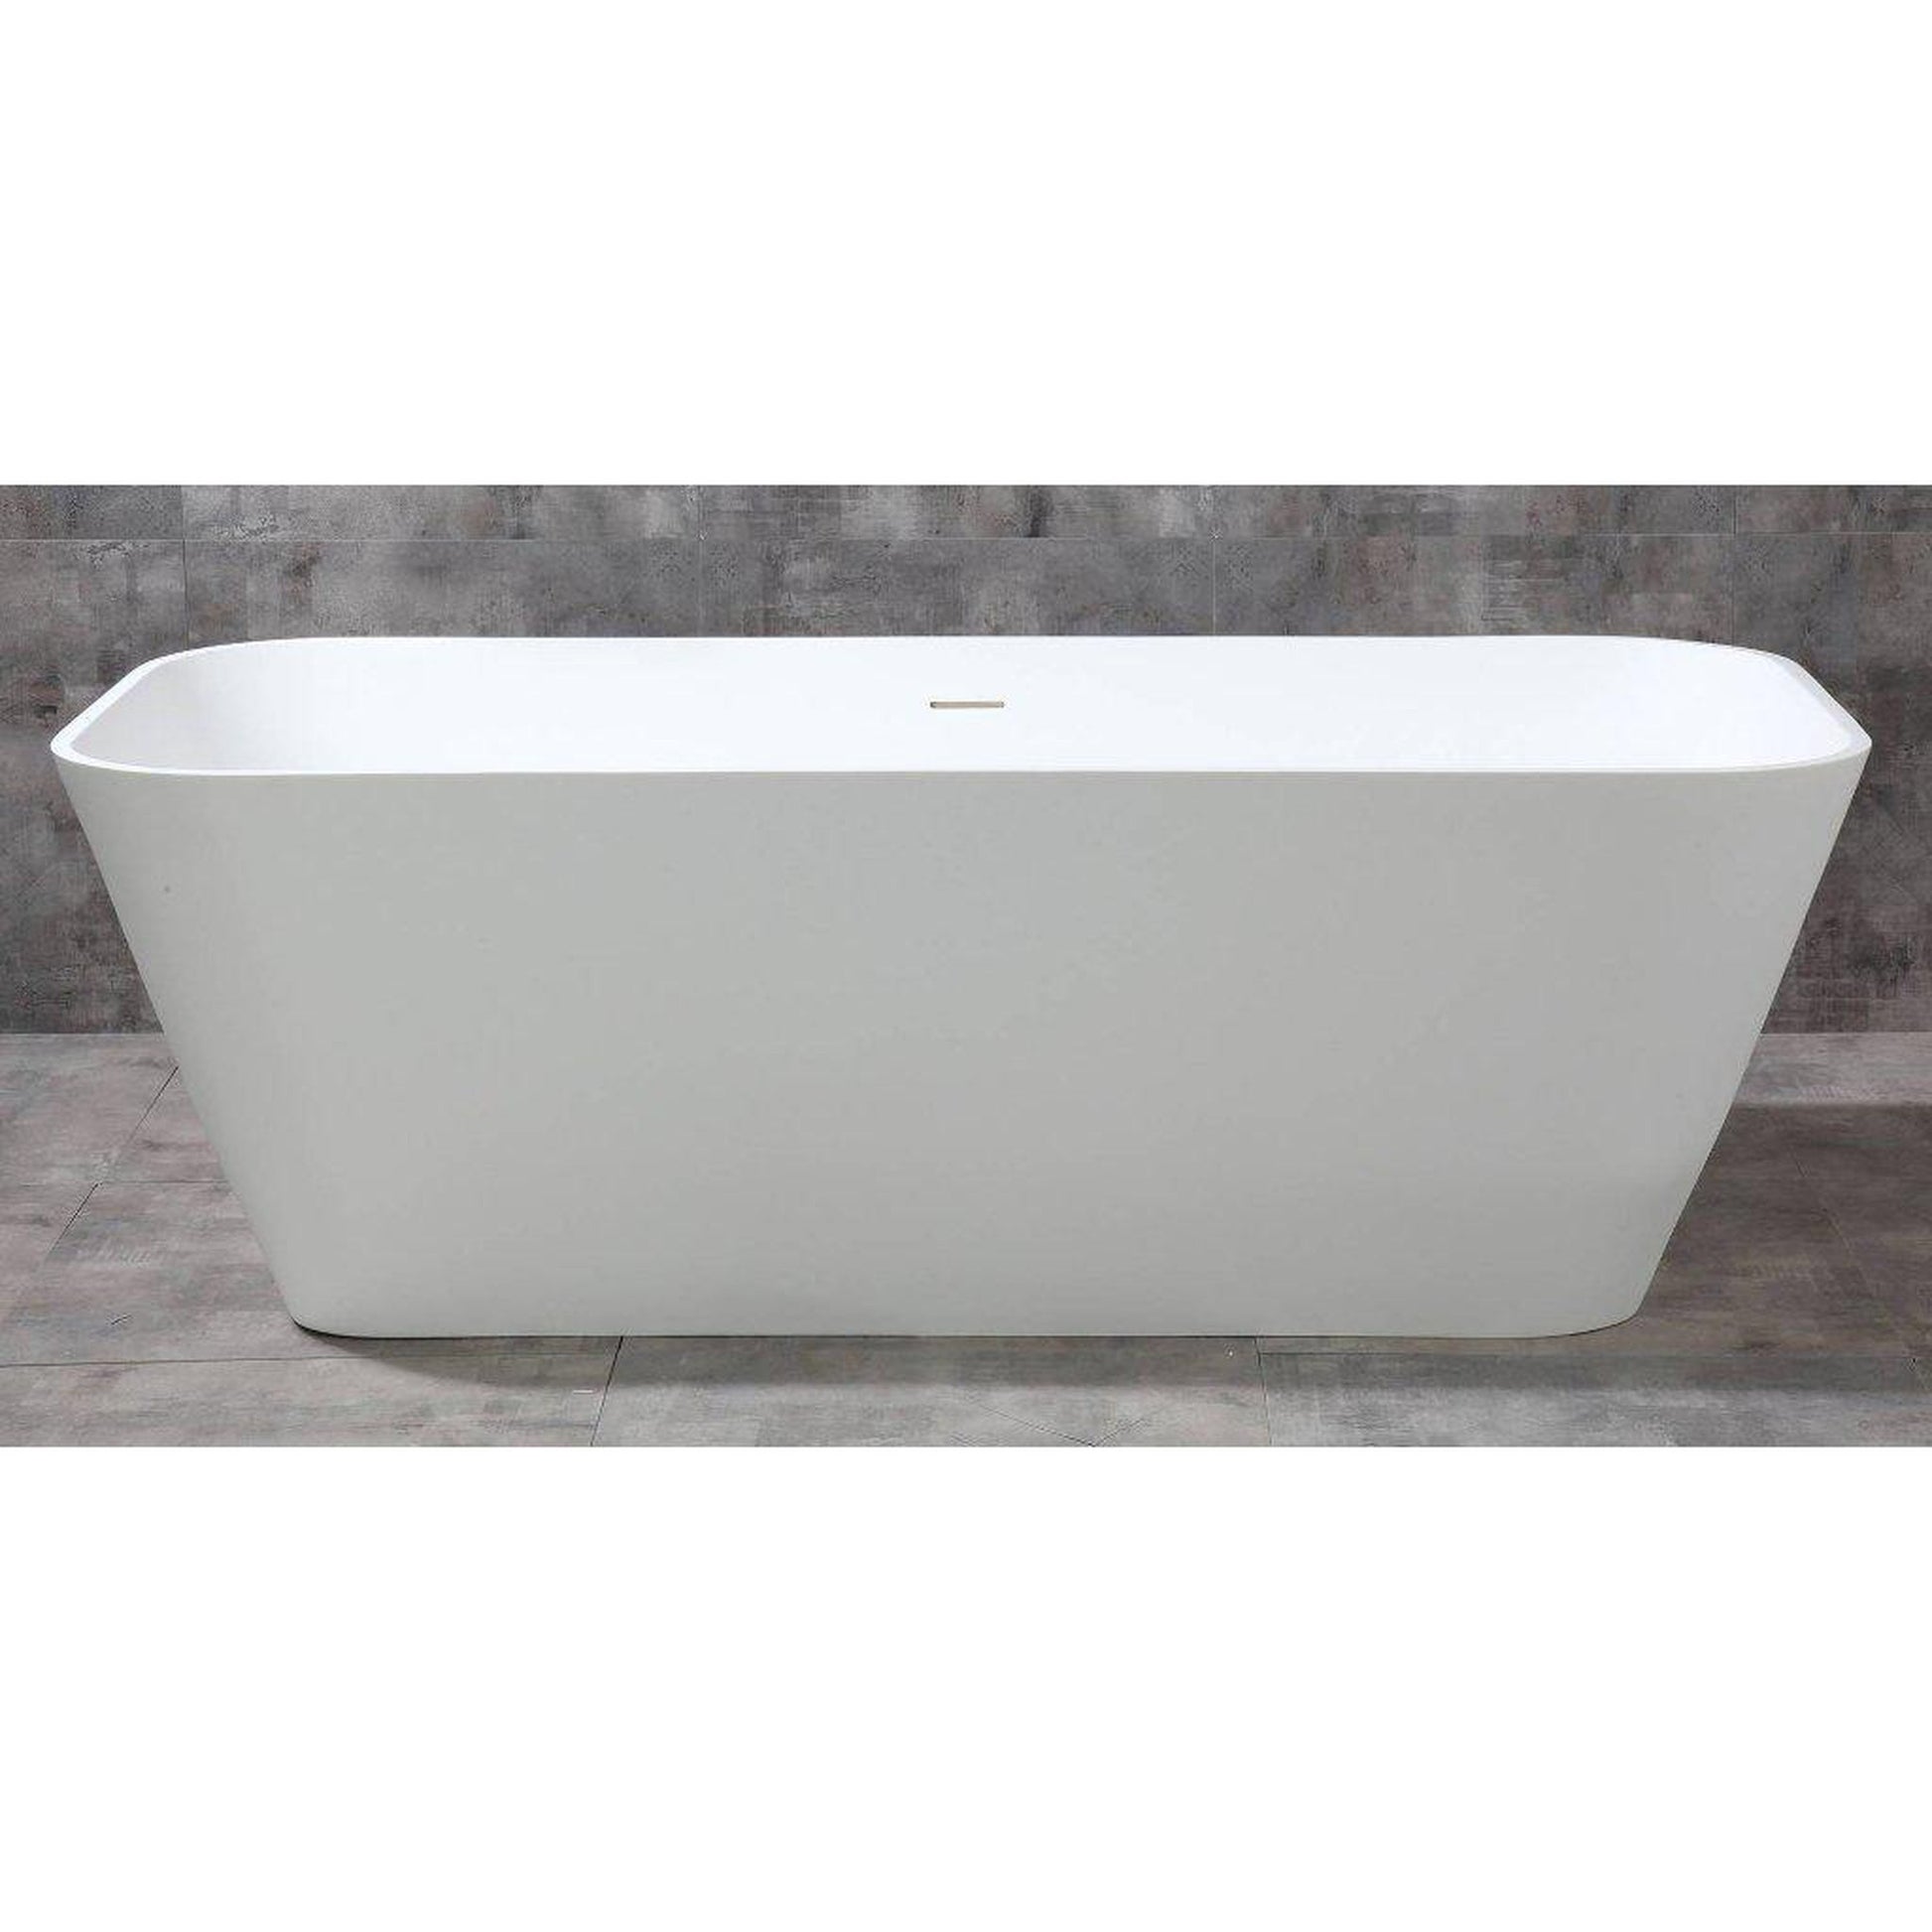 ALFI Brand AB9952 67" One Person Freestanding White Rectangle Solid Surface Smooth Resin Soaking Bathtub